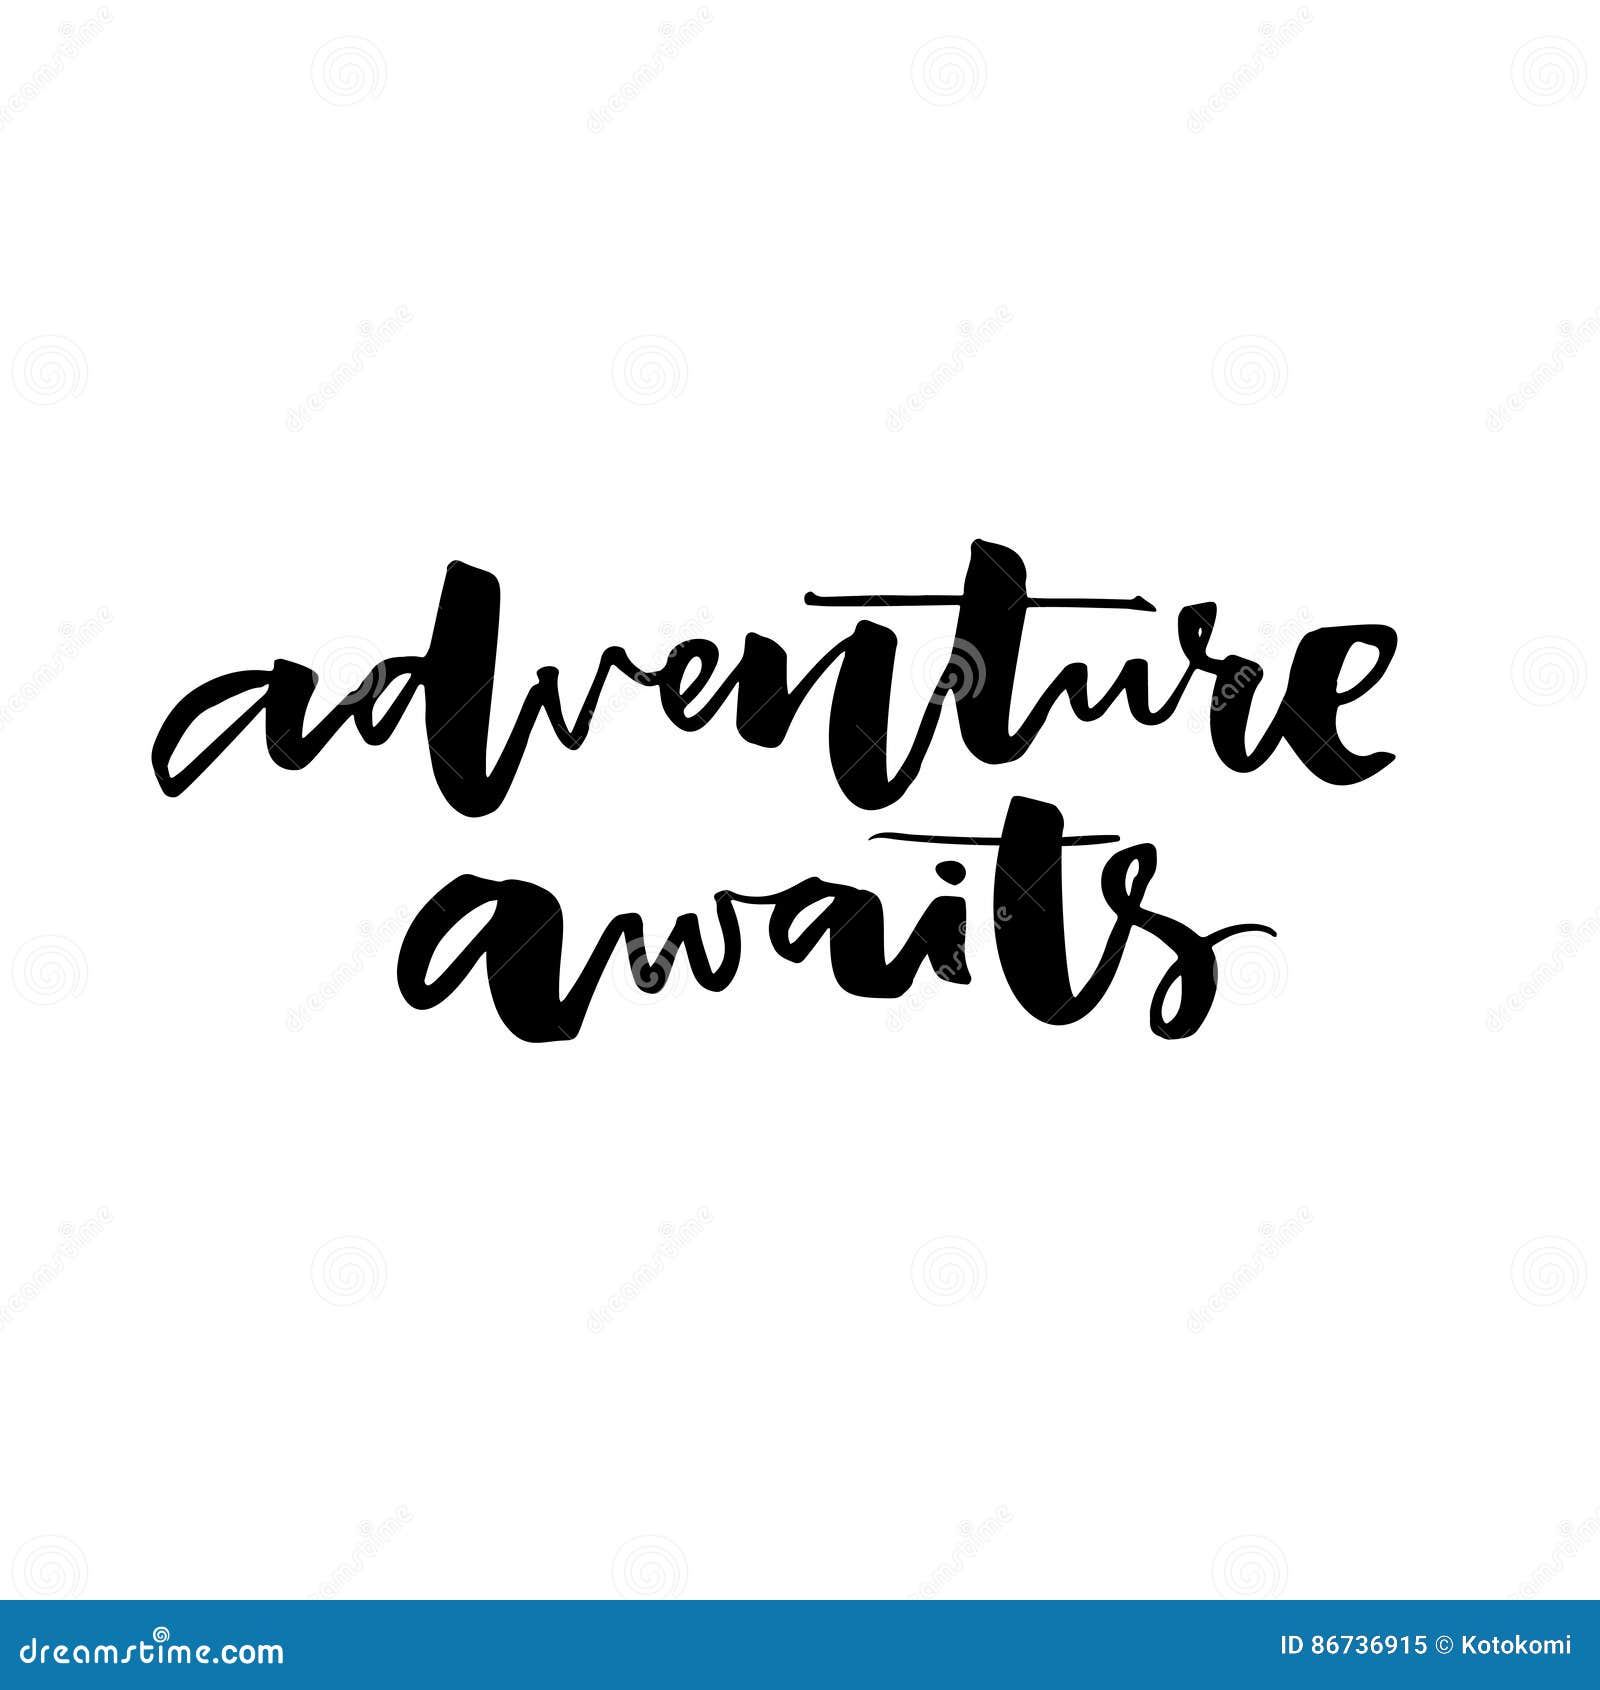 Adventure Awaits Inspiration Quote About Travel And Life Vector Typography Isolated On White Background Stock Vector Illustration Of Fashion Journey 86736915